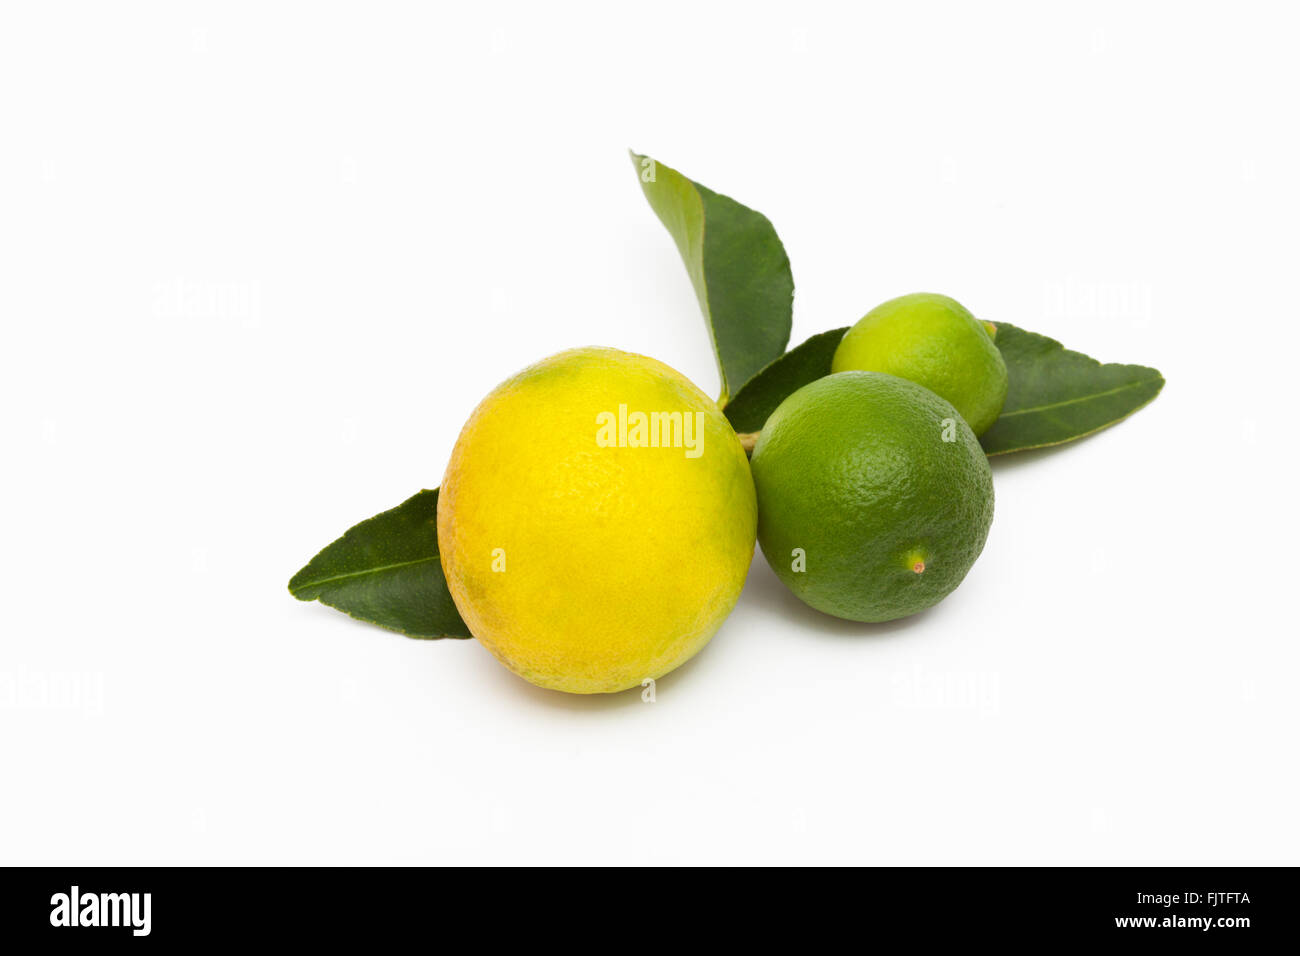 Freshly picked key limes from a Florida garden Stock Photo